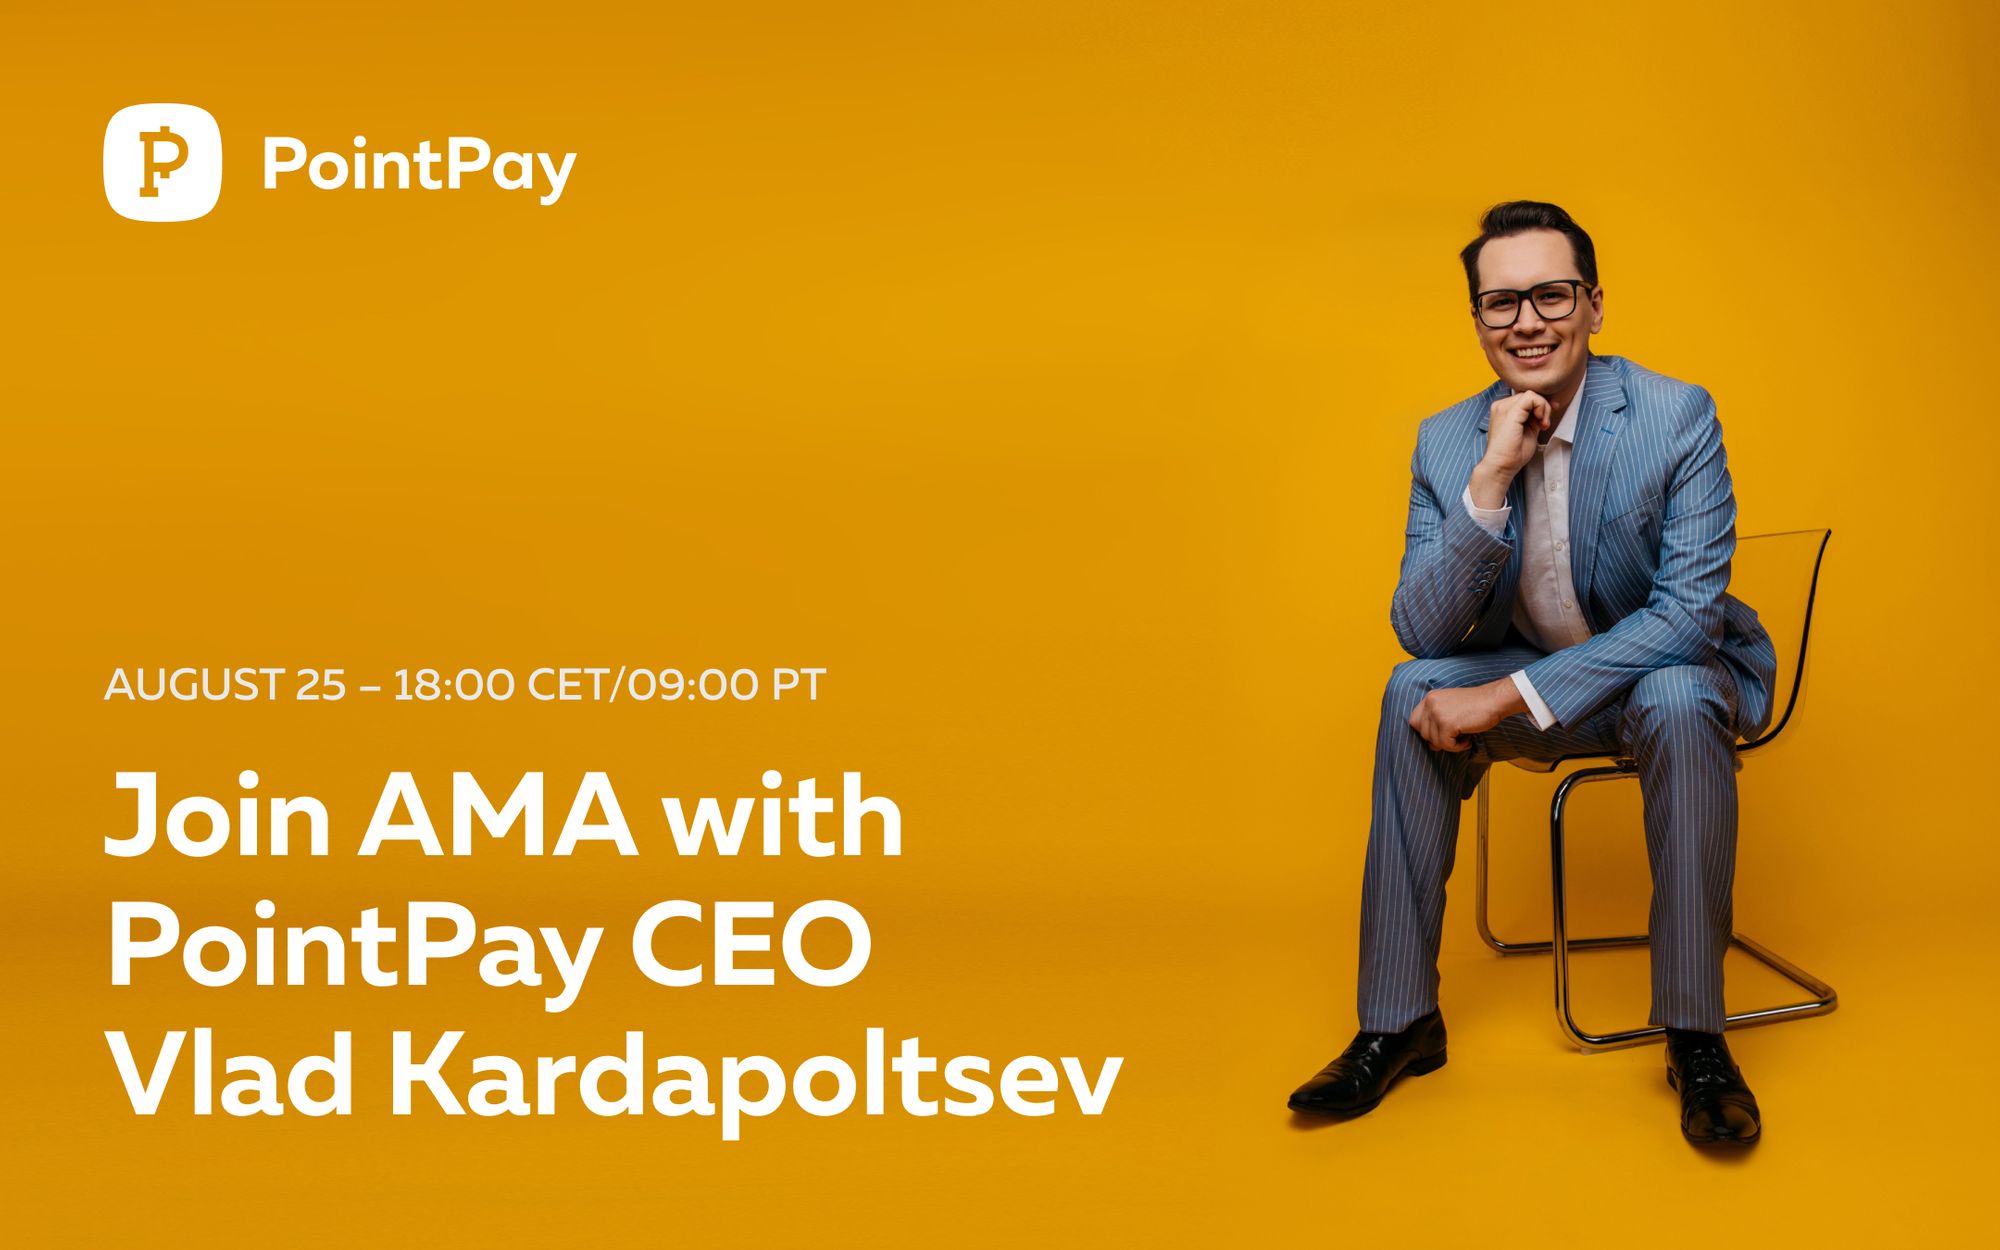 Join AMA with PointPay CEO Vladimir Kardapoltsev on the 25th of August 2022 (18:00 CET time)